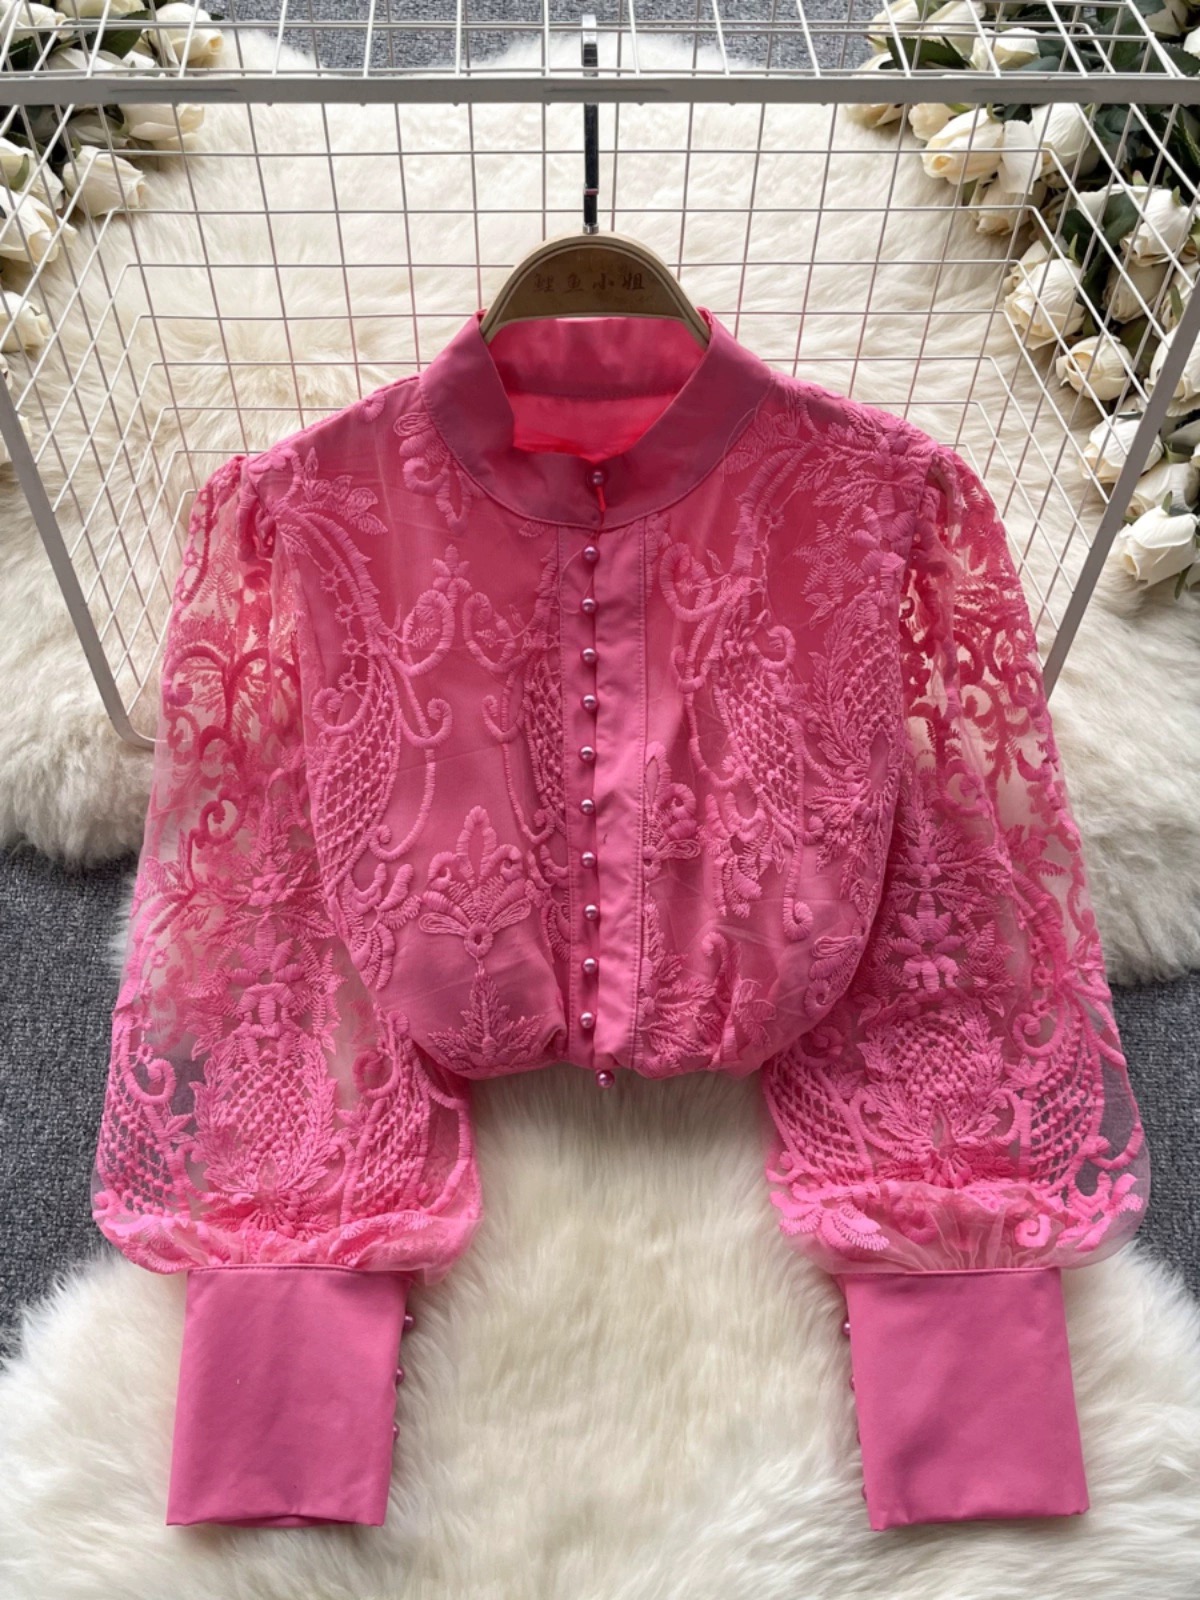 Vintage, High Sense, Puffy Sleeve Shirt, Tulle Embroidery, Lace Top